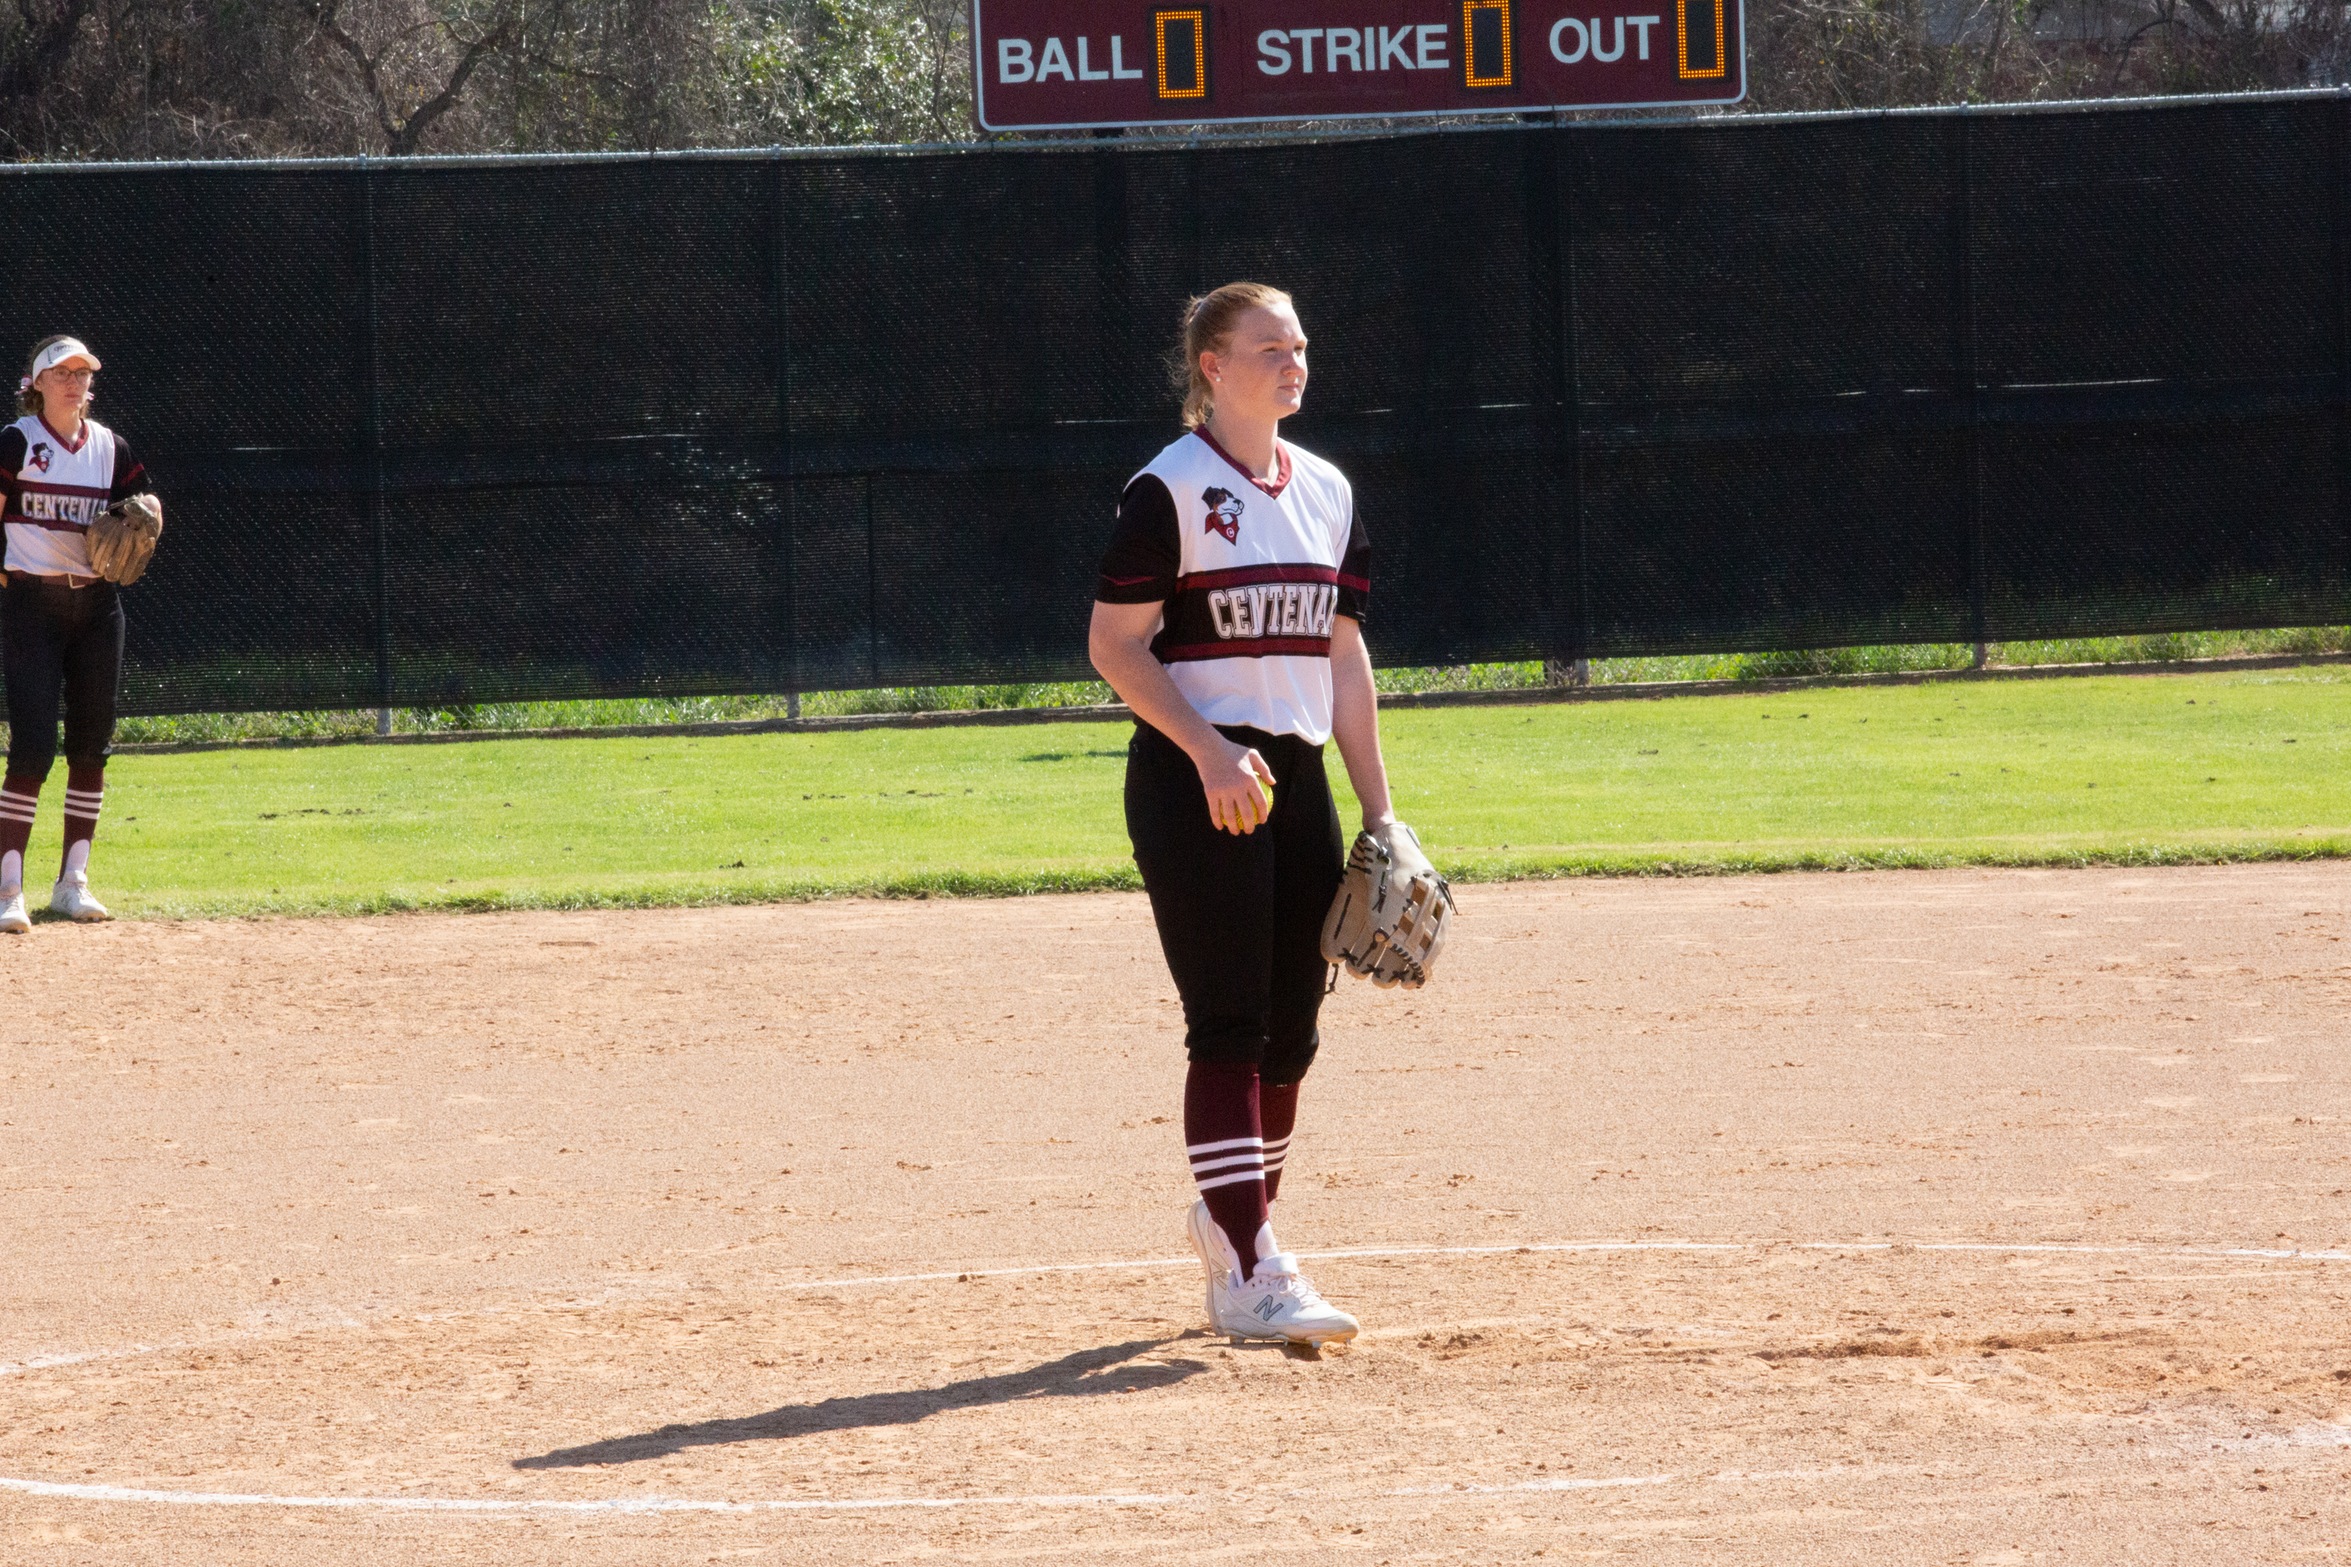 Senior P Ashley Hunter picked up the win on Sunday as she helped lead the Ladies to a series sweep over Dallas.